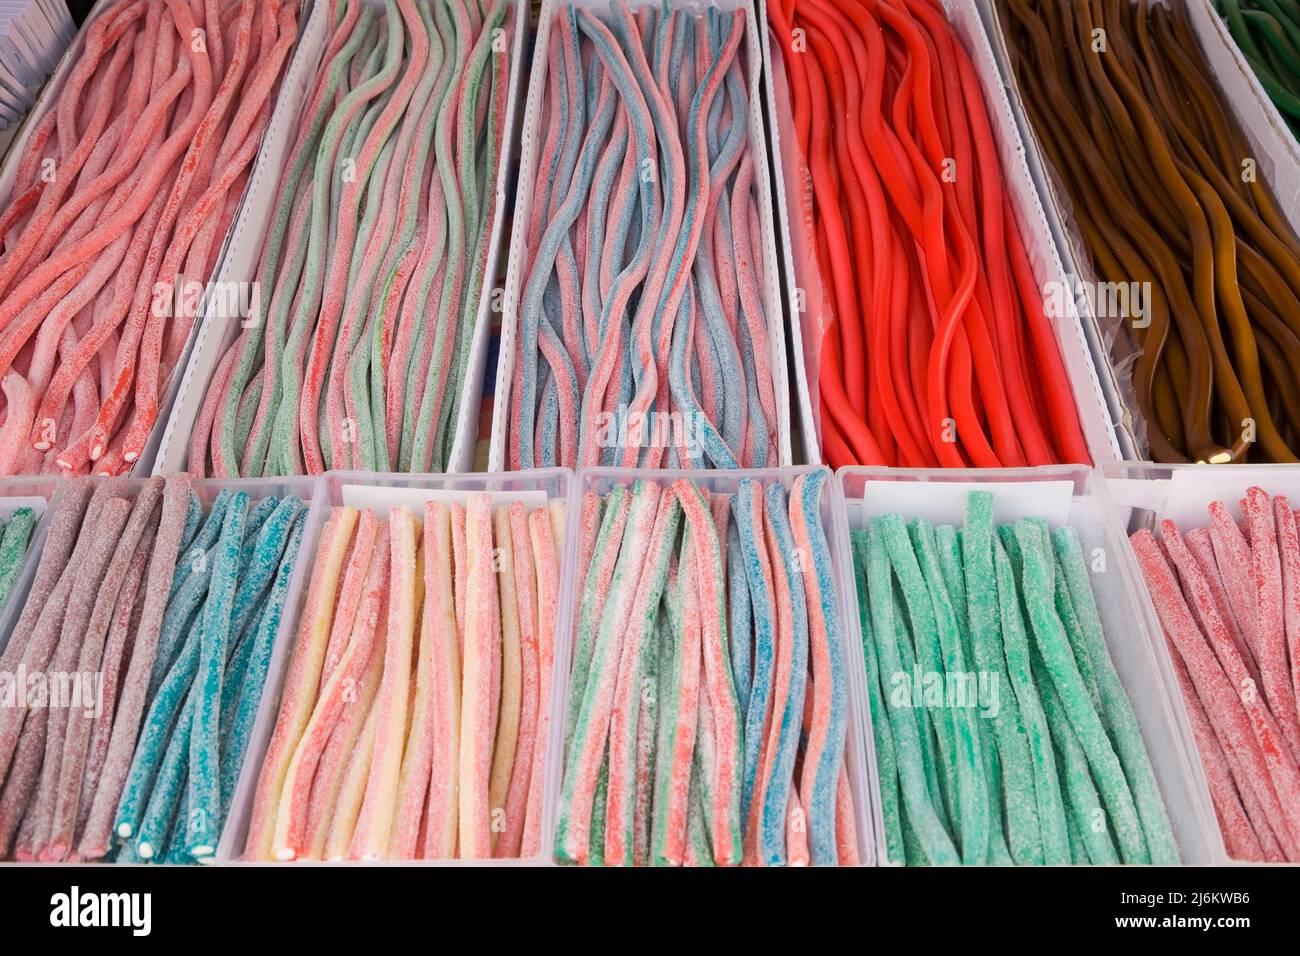 Baskets of assorted licorice sticks on display at an outdoor market, Budapest, Hungary. Stock Photo